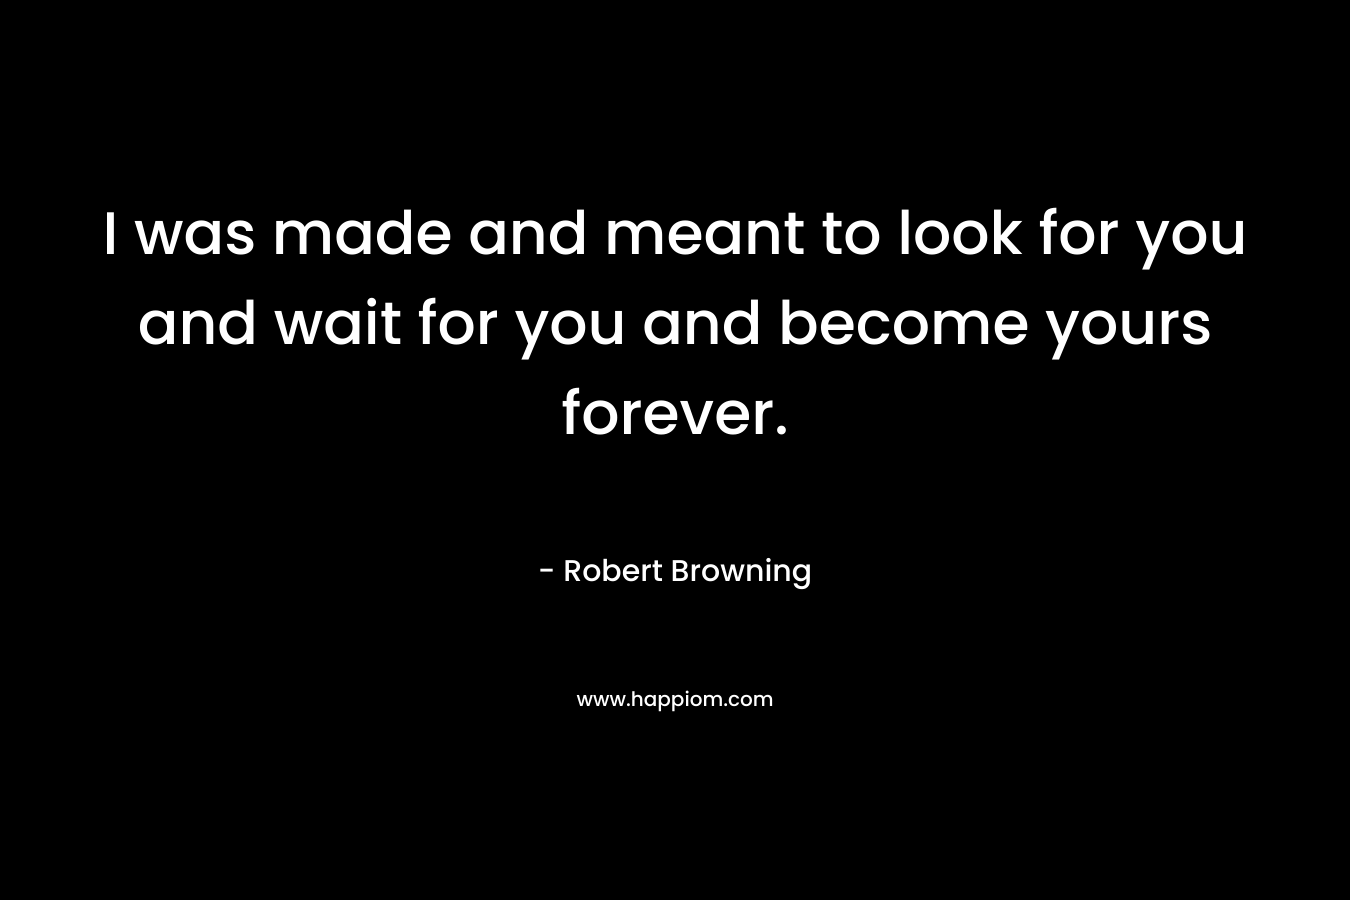 I was made and meant to look for you and wait for you and become yours forever. – Robert Browning